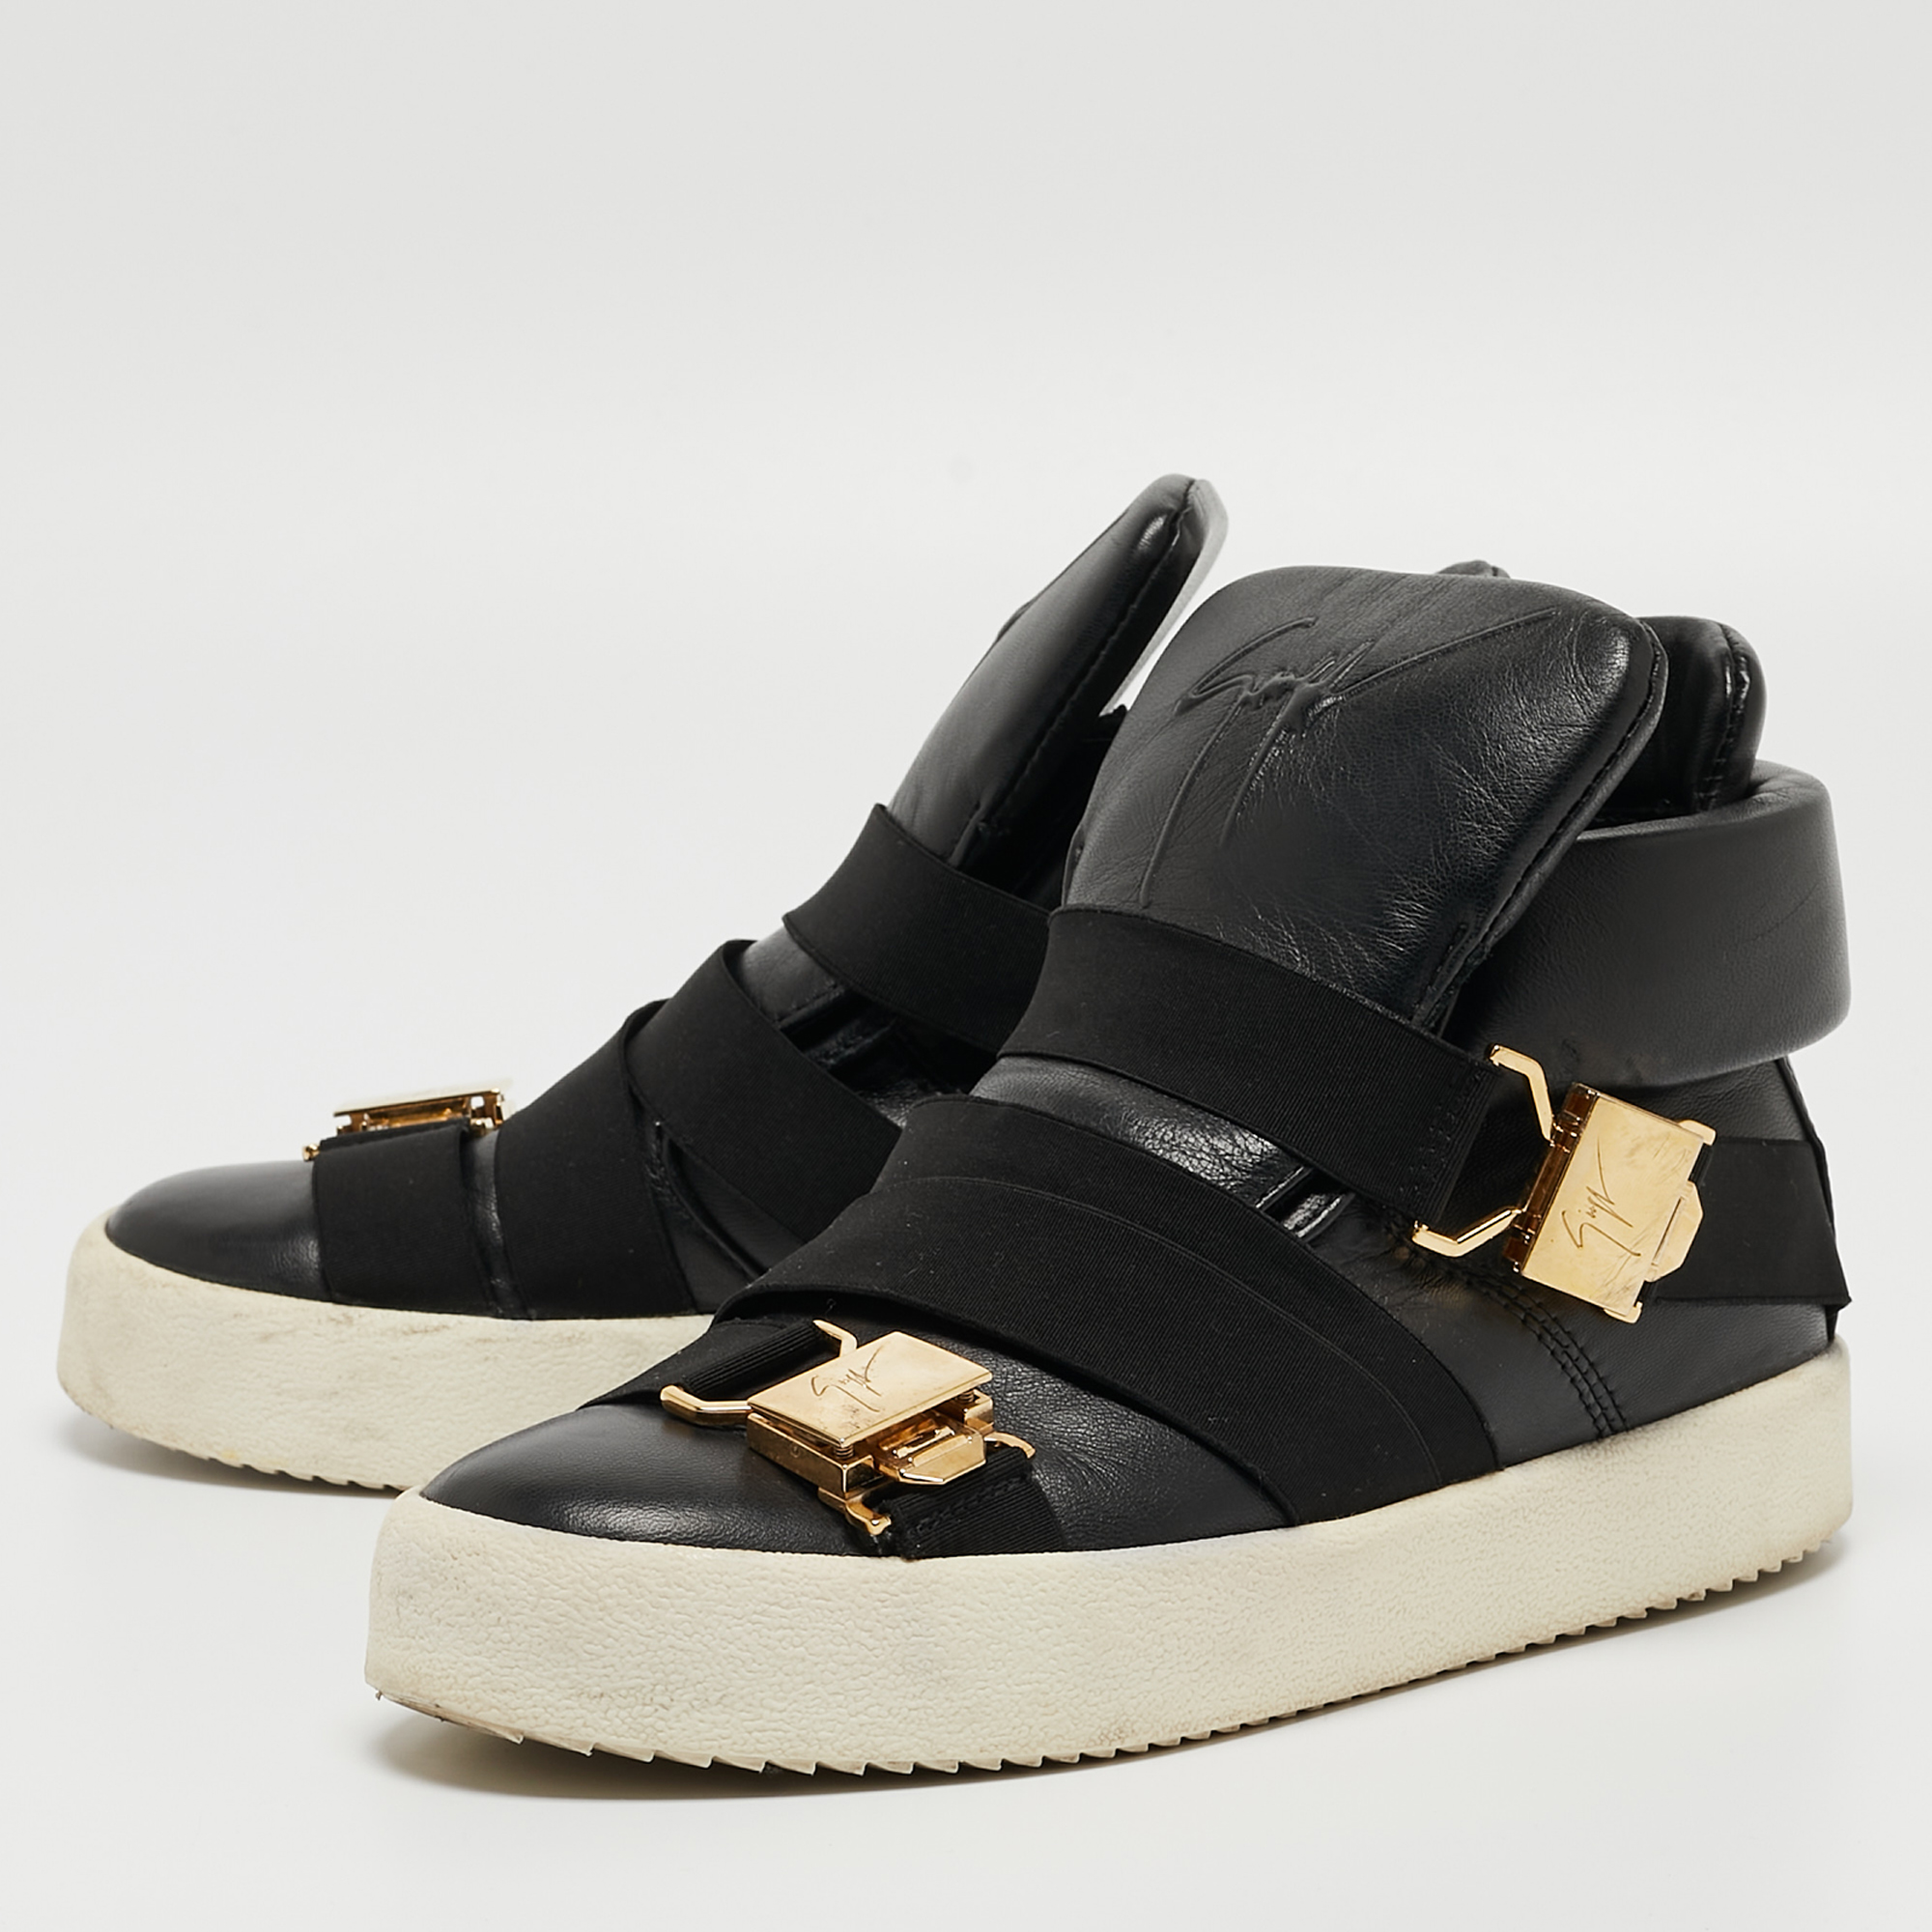 

Giuseppe Zanotti Black Leather Double Buckle High Top Sneakers Size